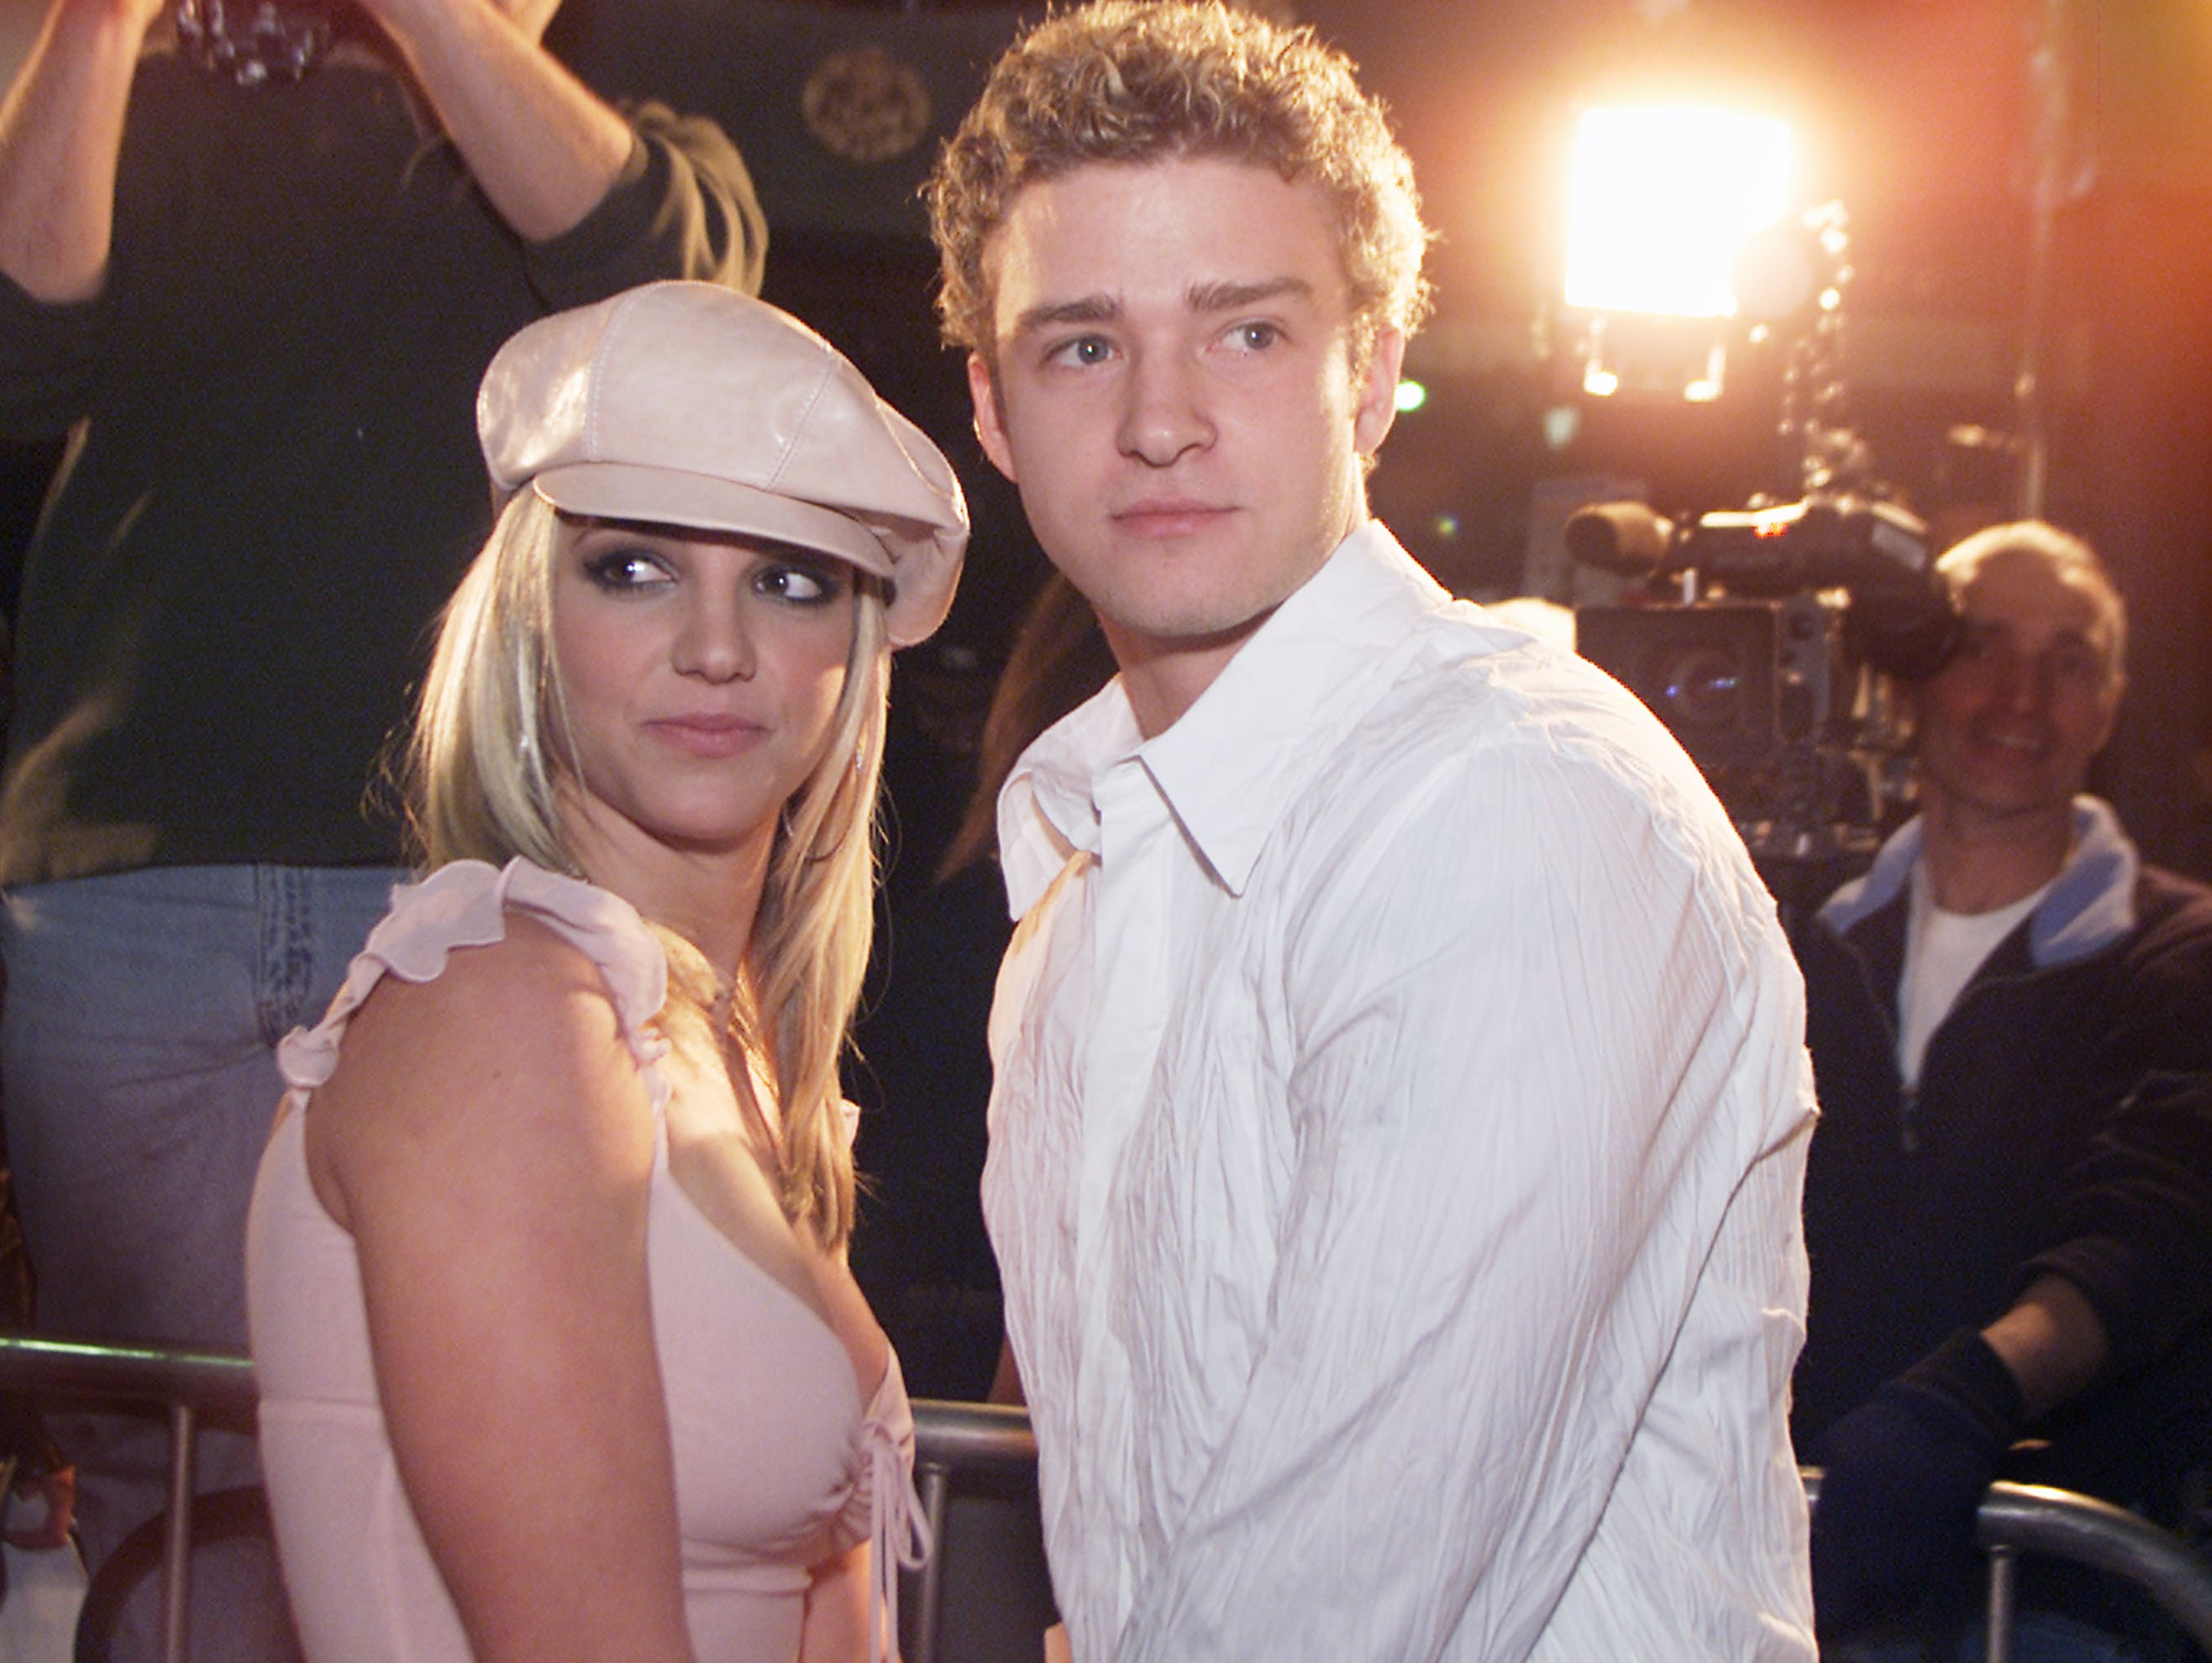 Britney Spears and Justin Timberlake photographed in 2002